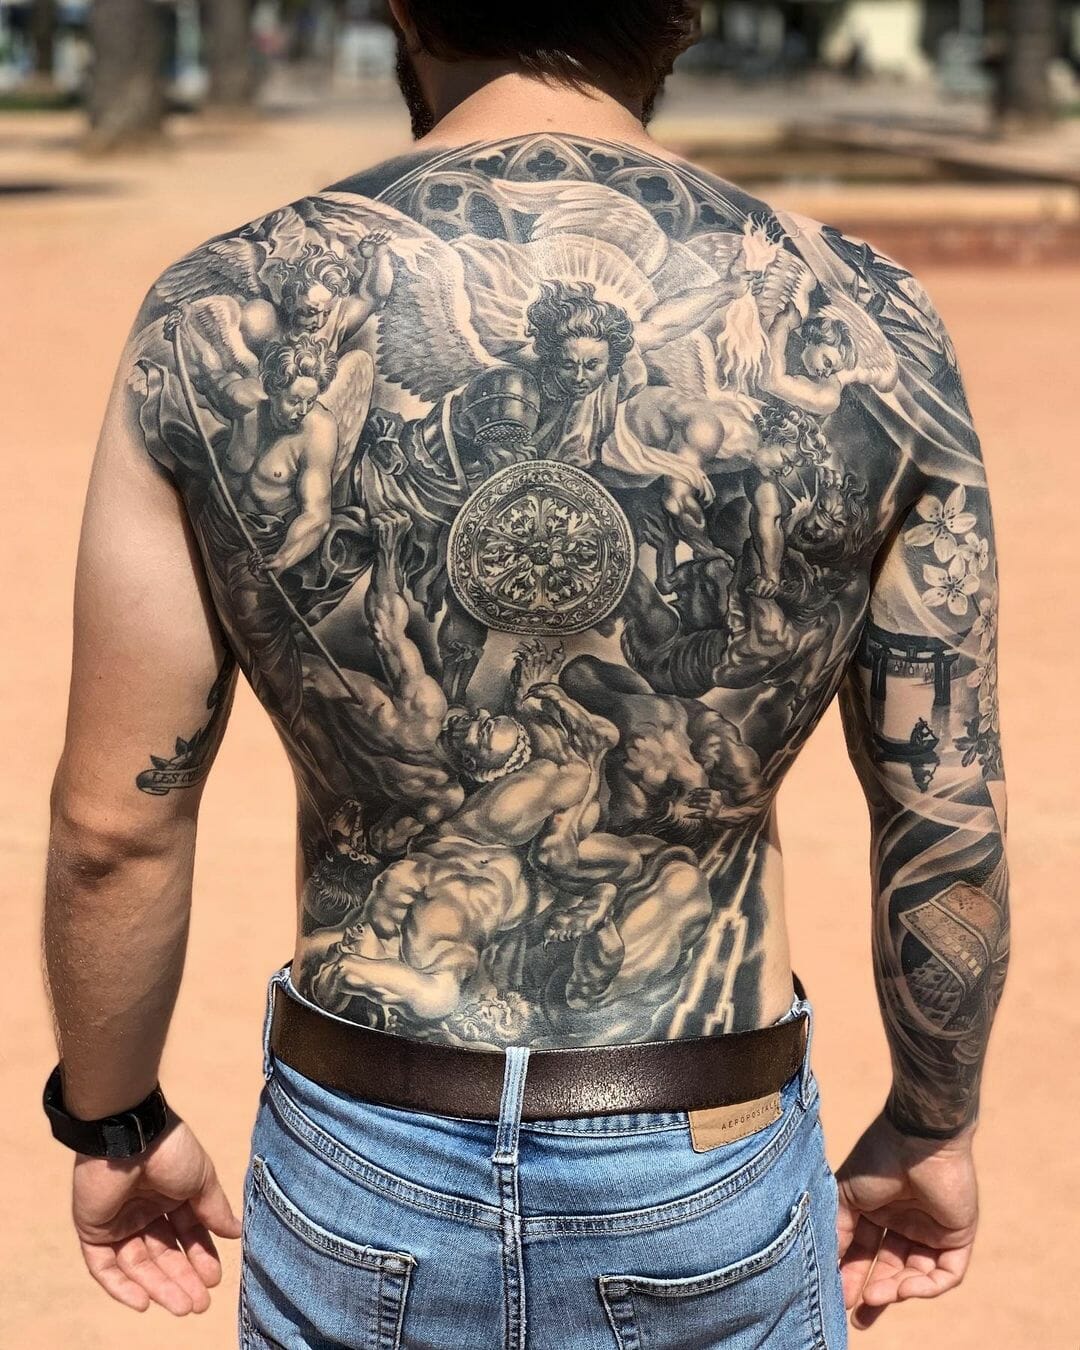 Best Full Back Tattoo Ideas You Have To See To Believe